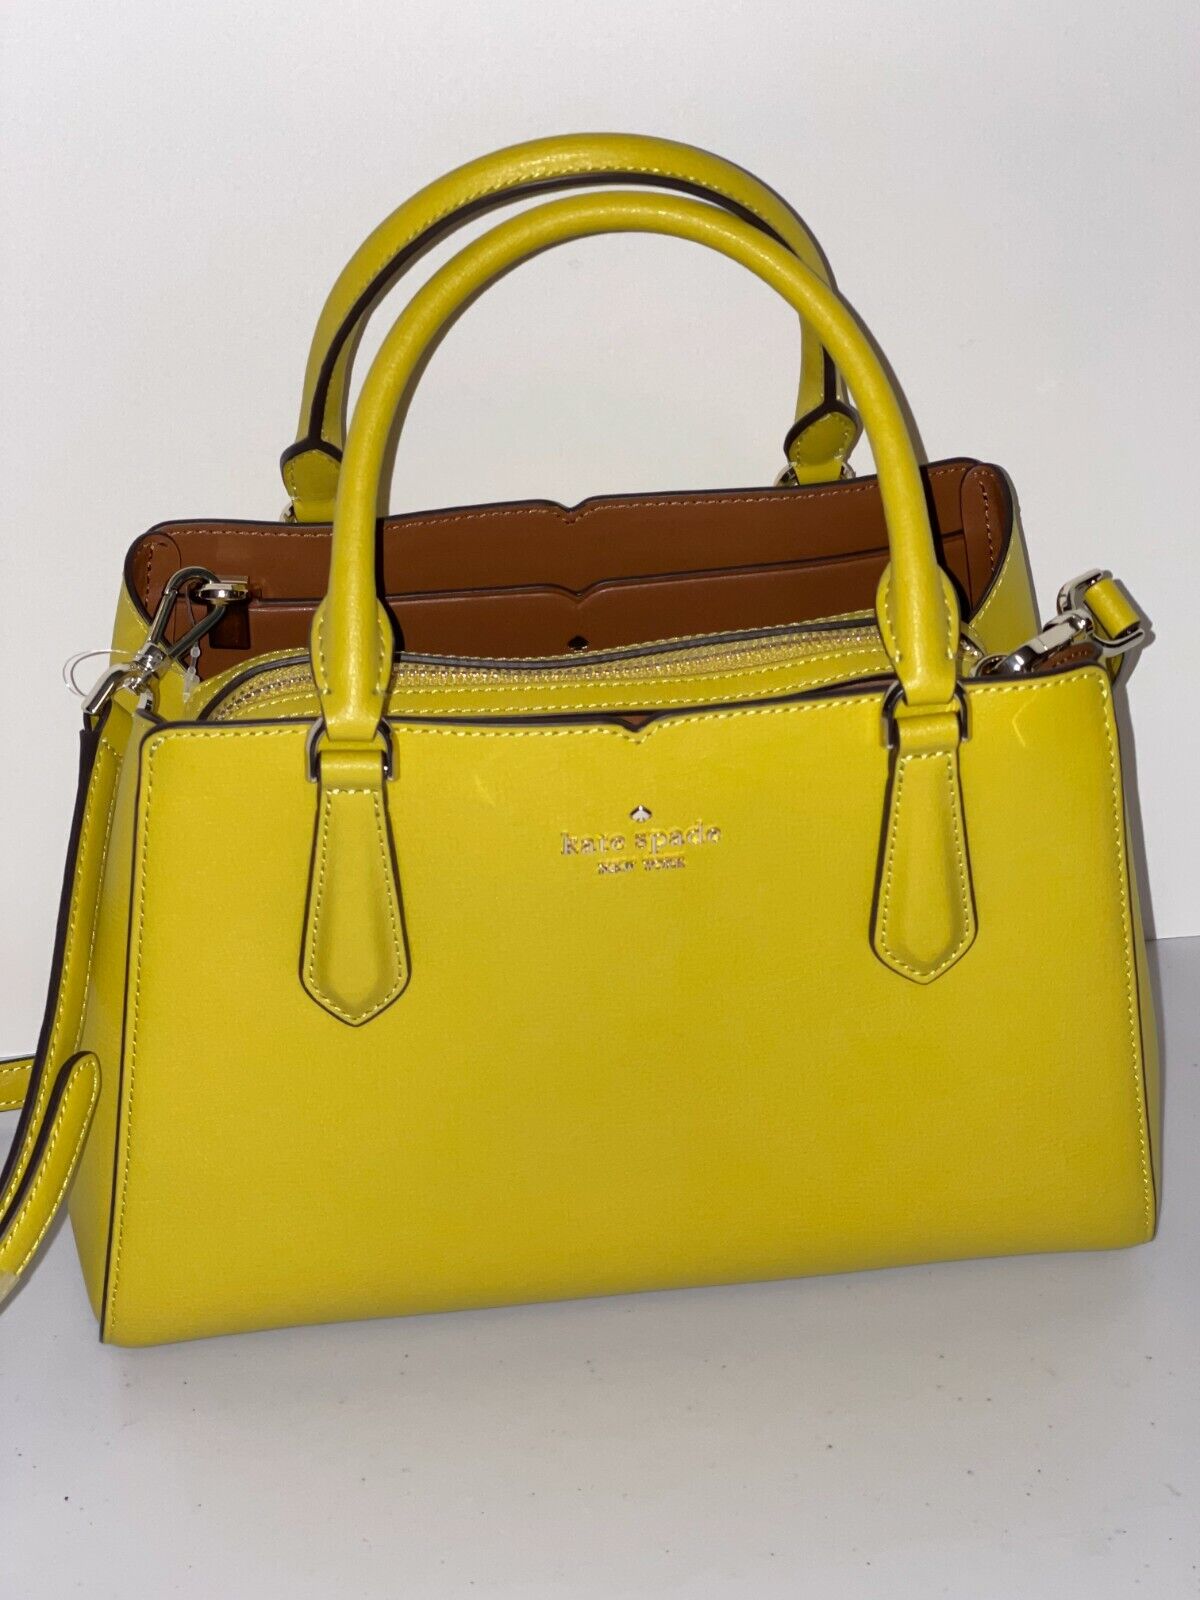 NWT Kate Spade Tippy Small Triple Compartment Satchel - Chartreuse $359